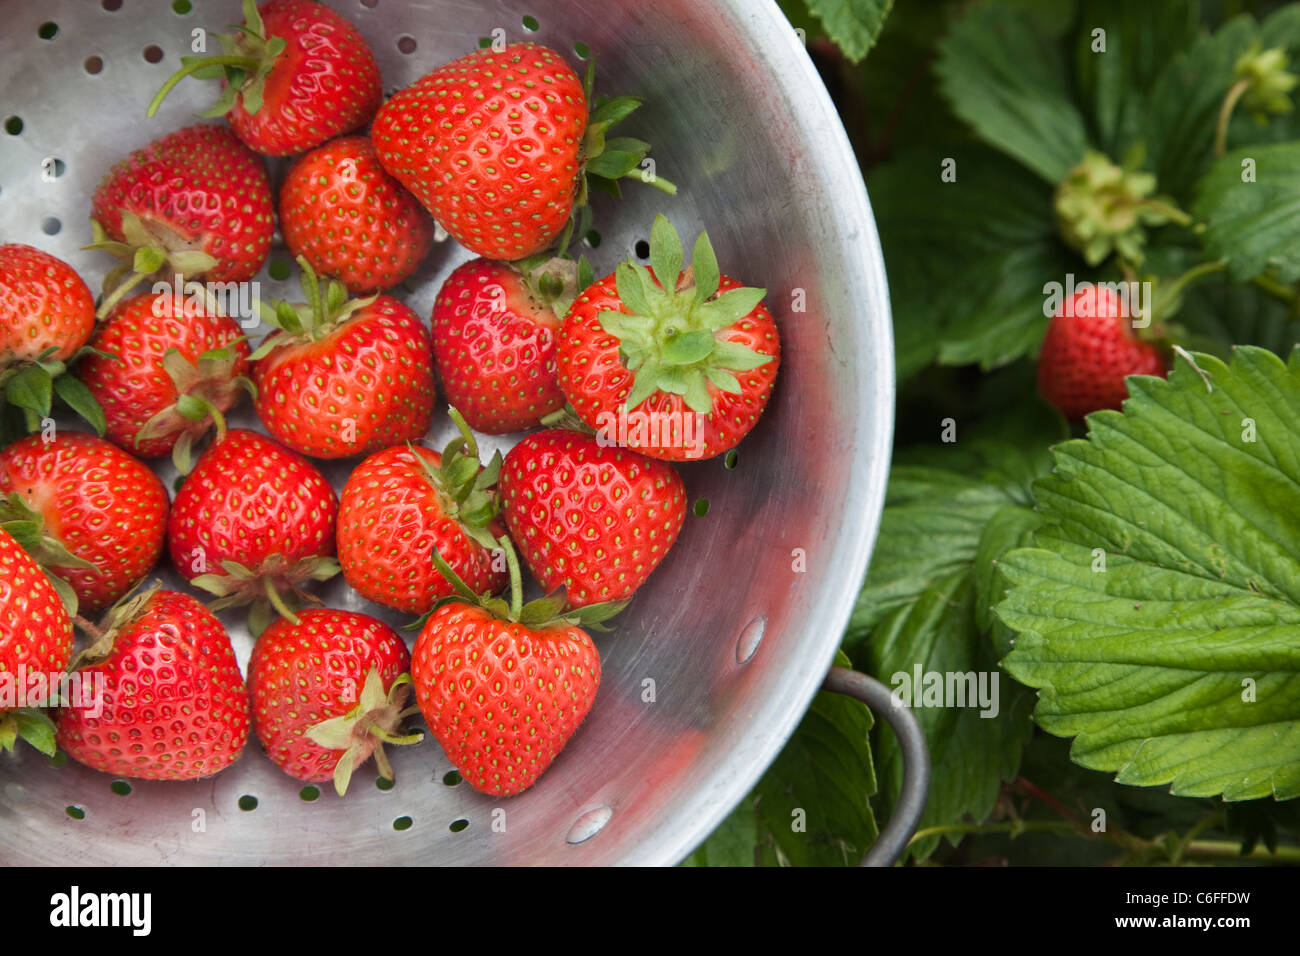 Strawberries picked from allotment, UK Stock Photo